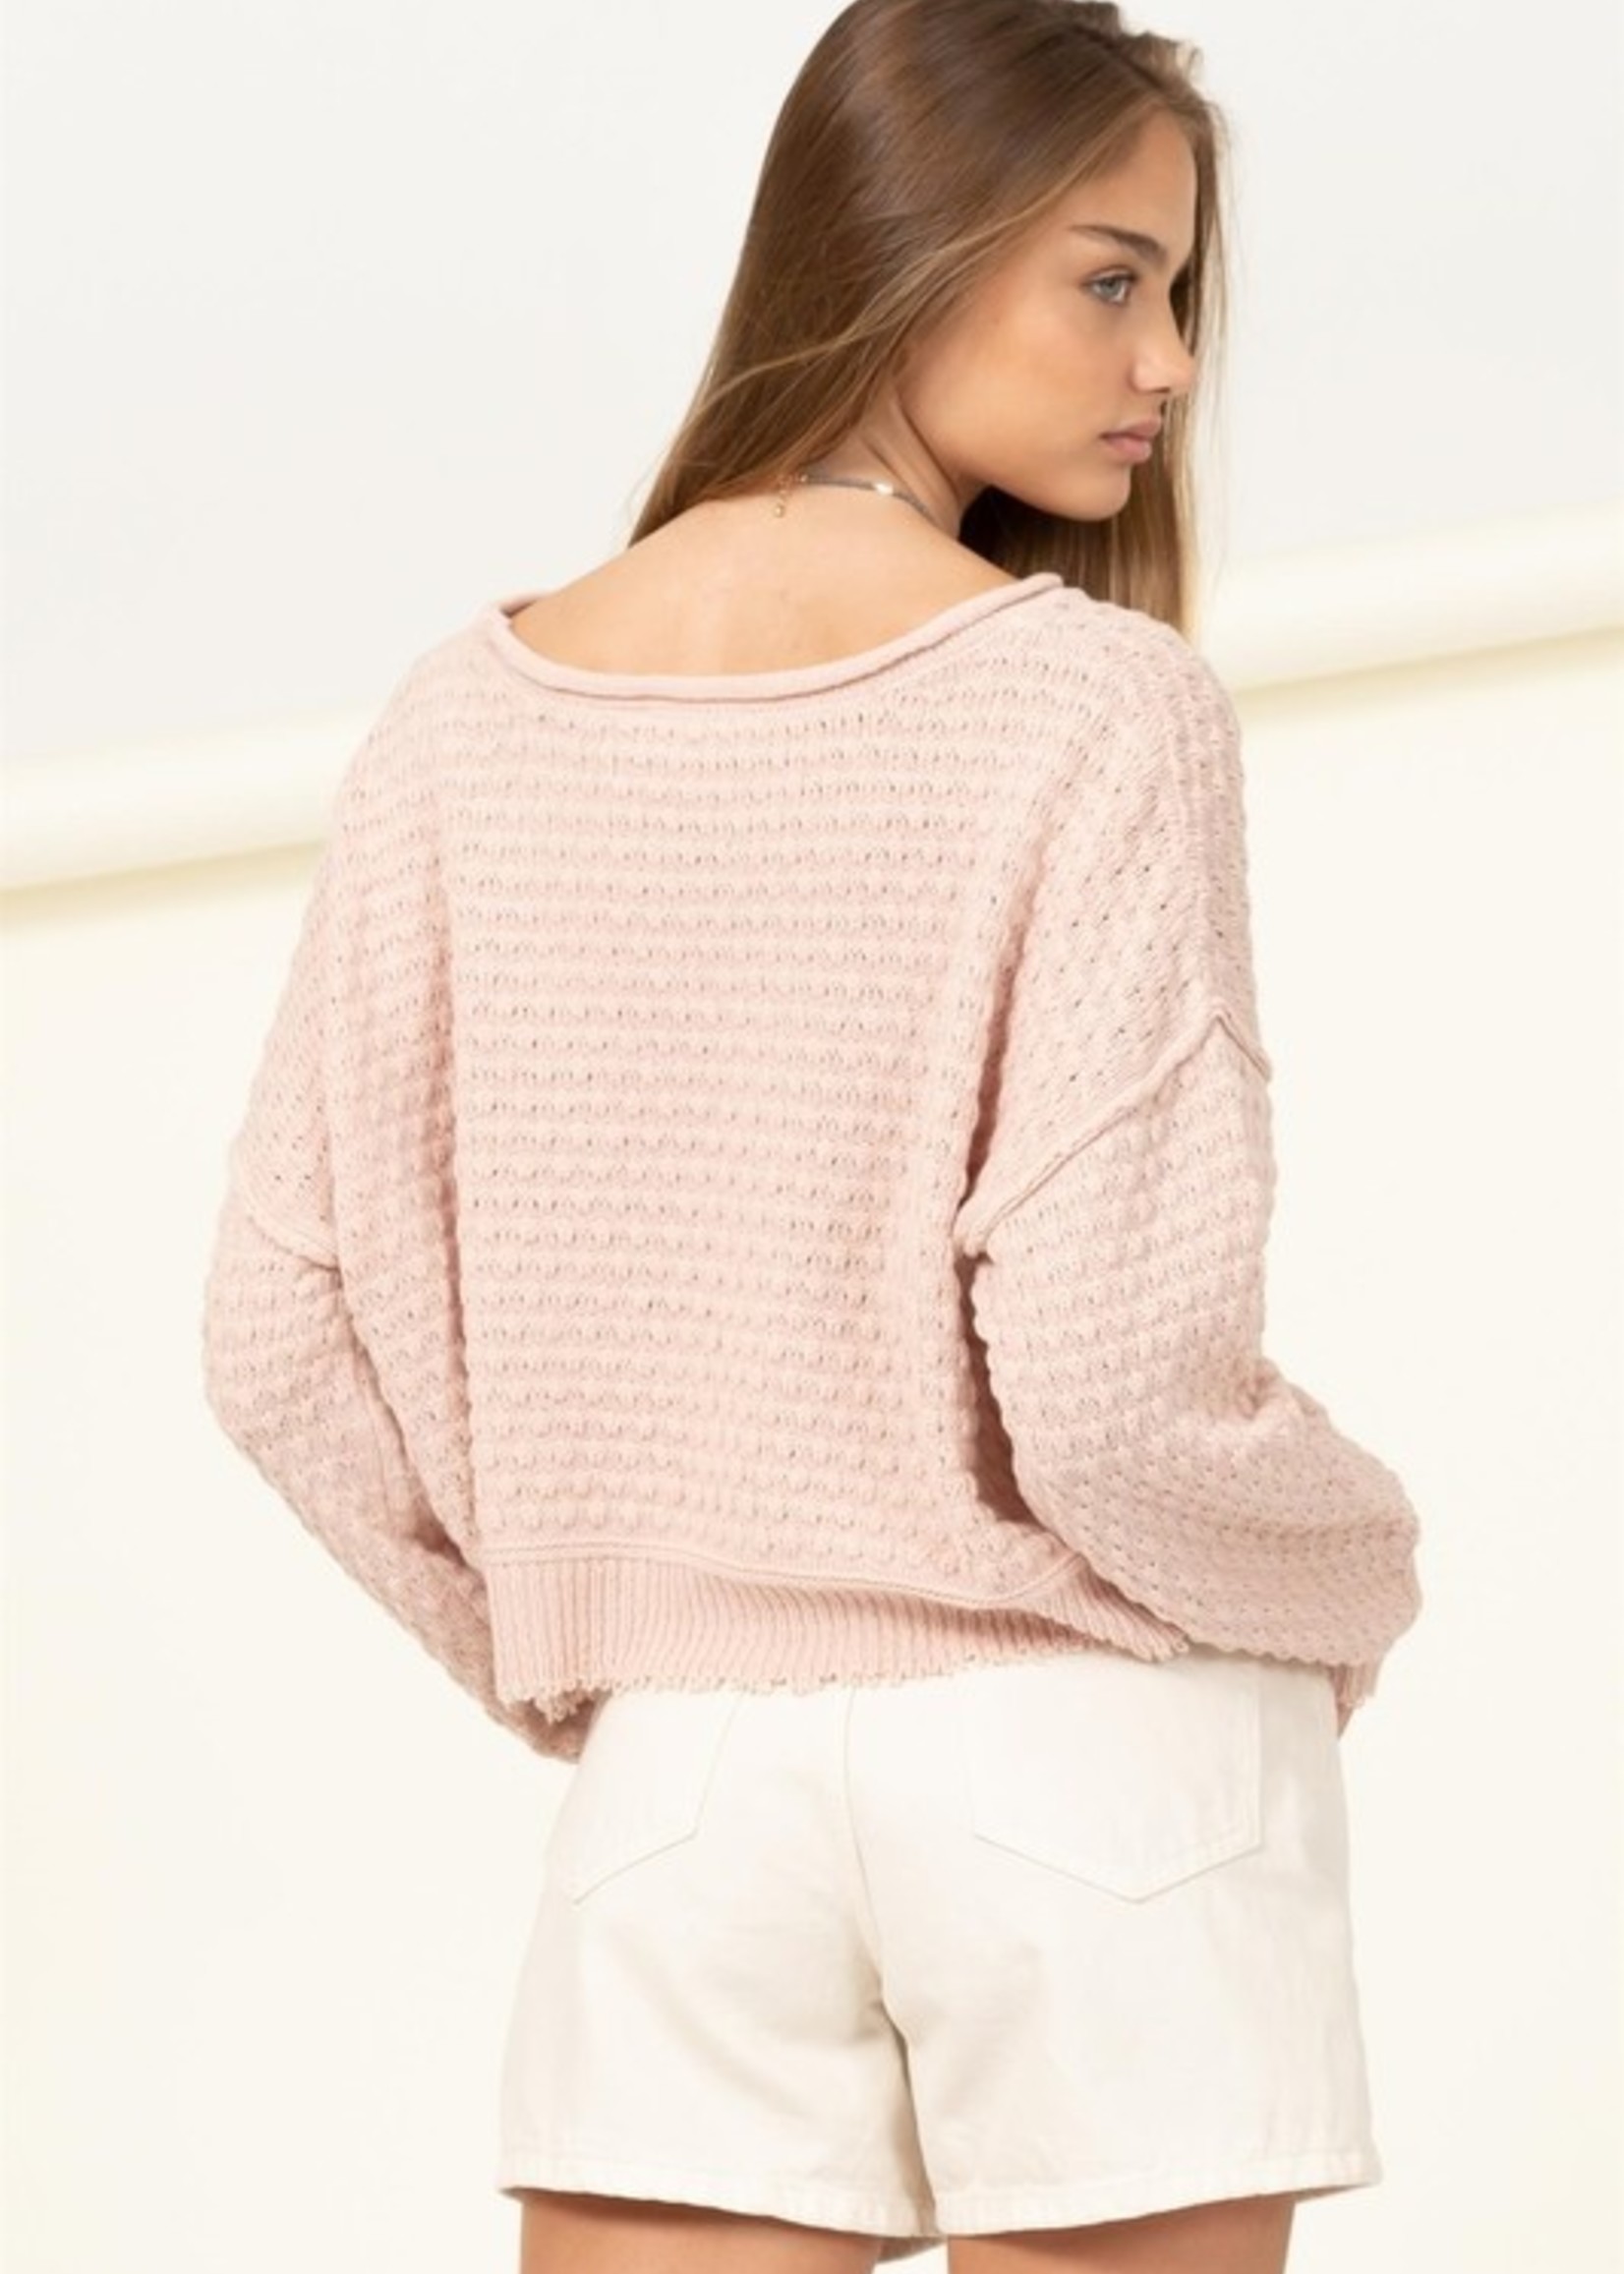 Textured Sweater with Distressed Bottom